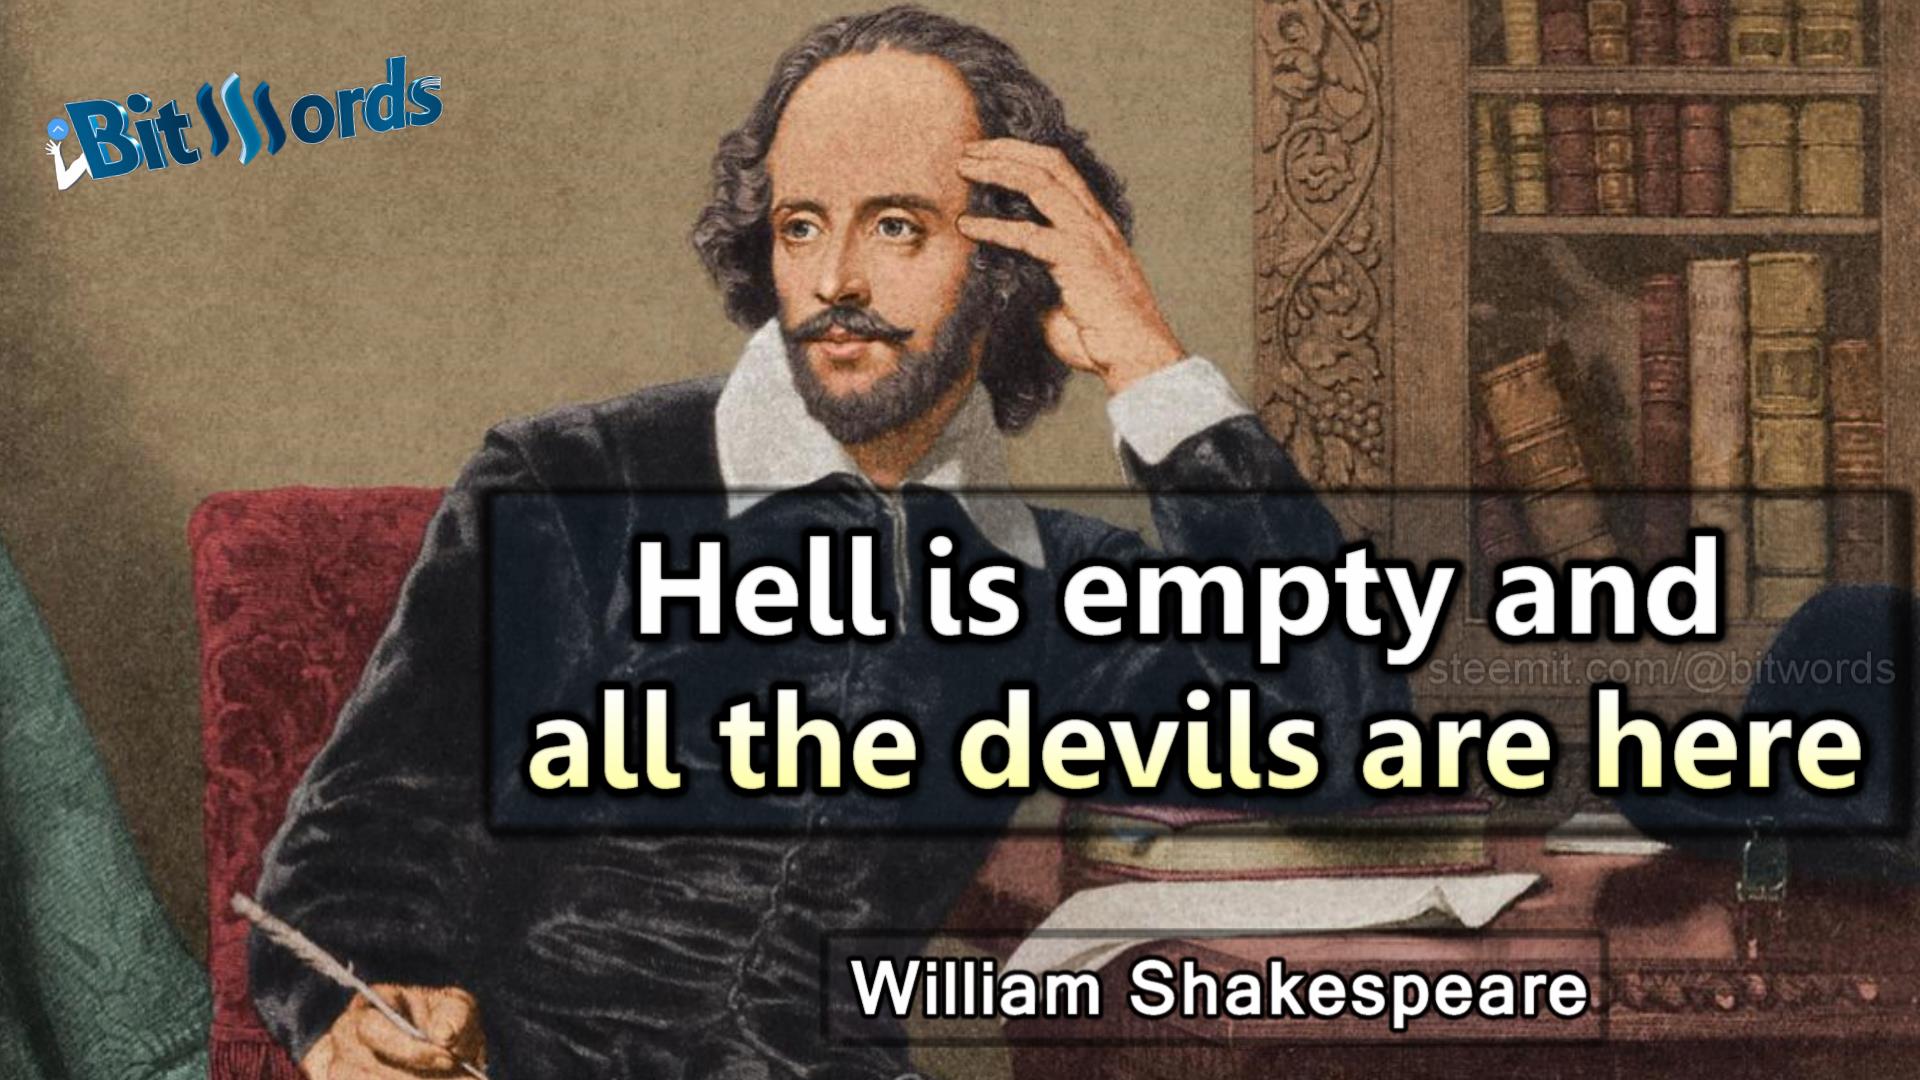 bitwords steemit quote of the day hell is empthy and all the devils are here william shakespeare.jpg